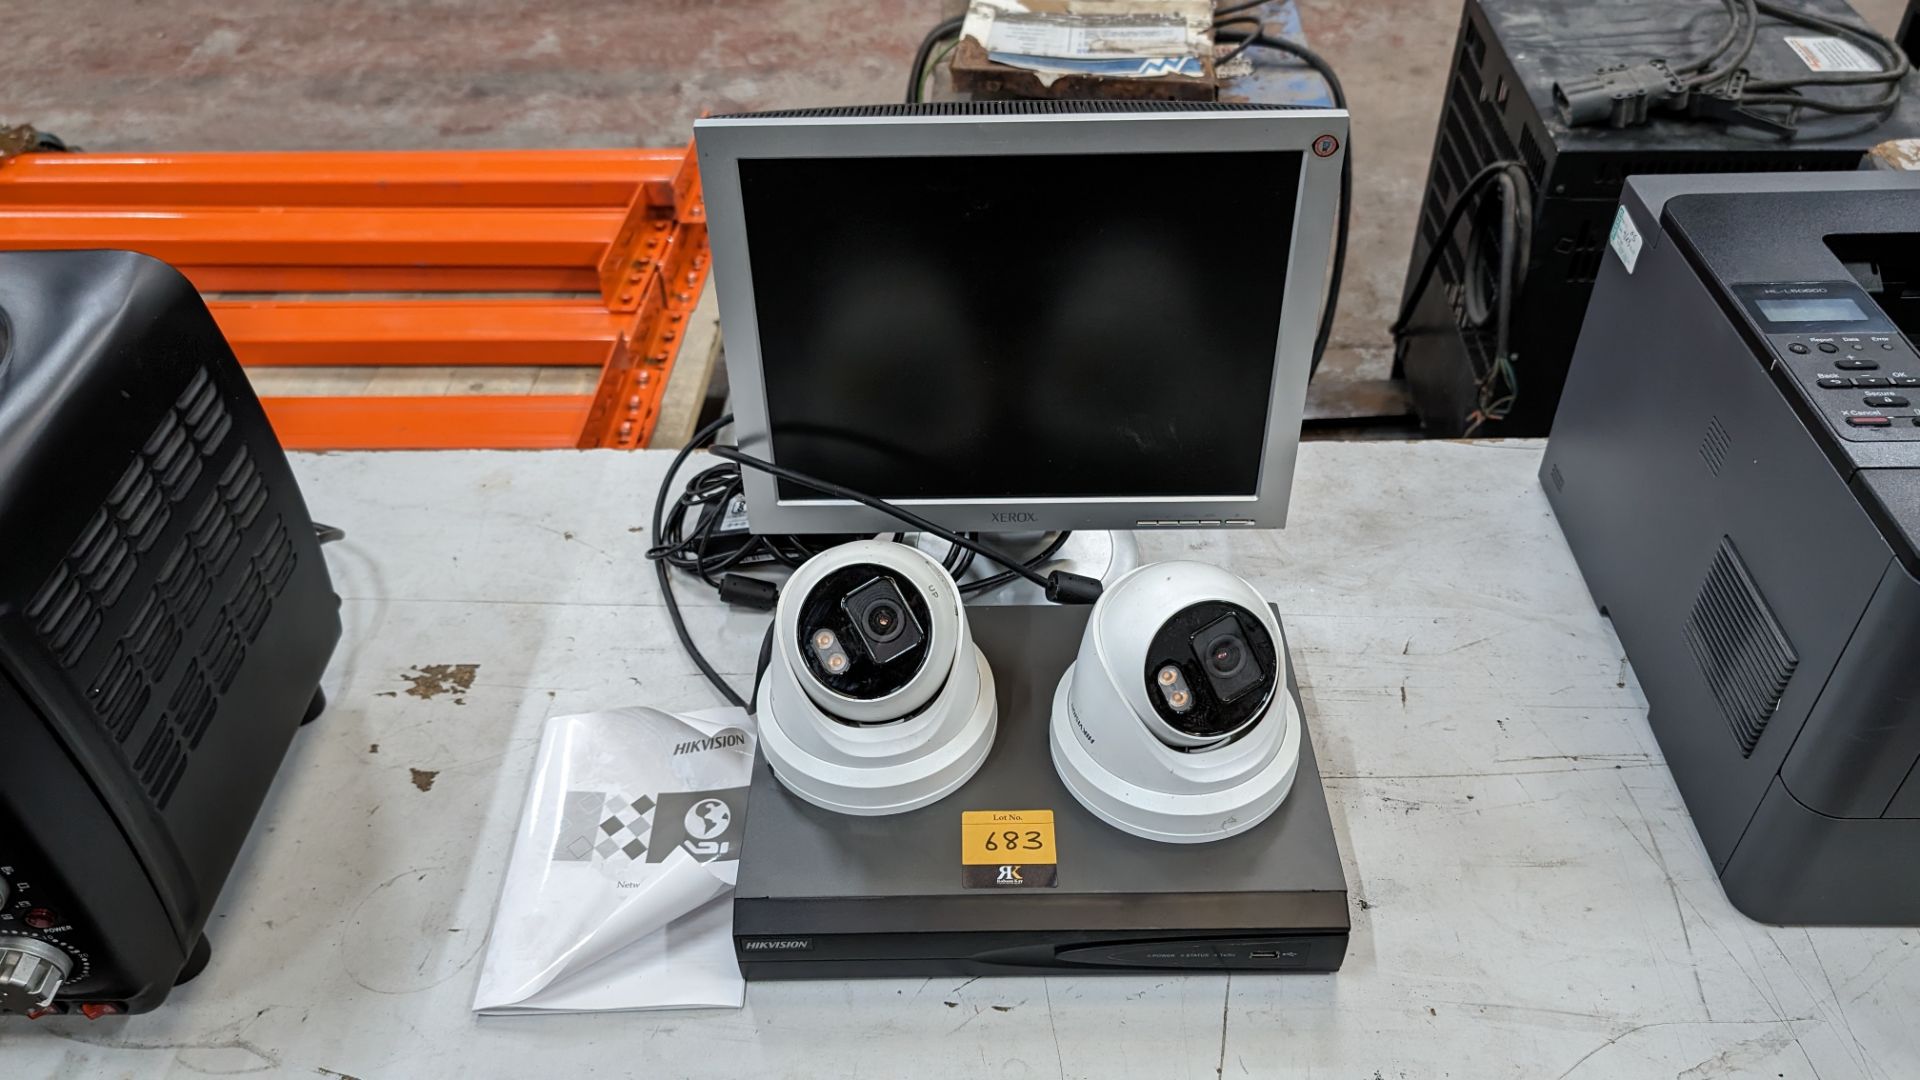 CCTV equipment comprising DVR, 2 off cameras and 1 off monitor